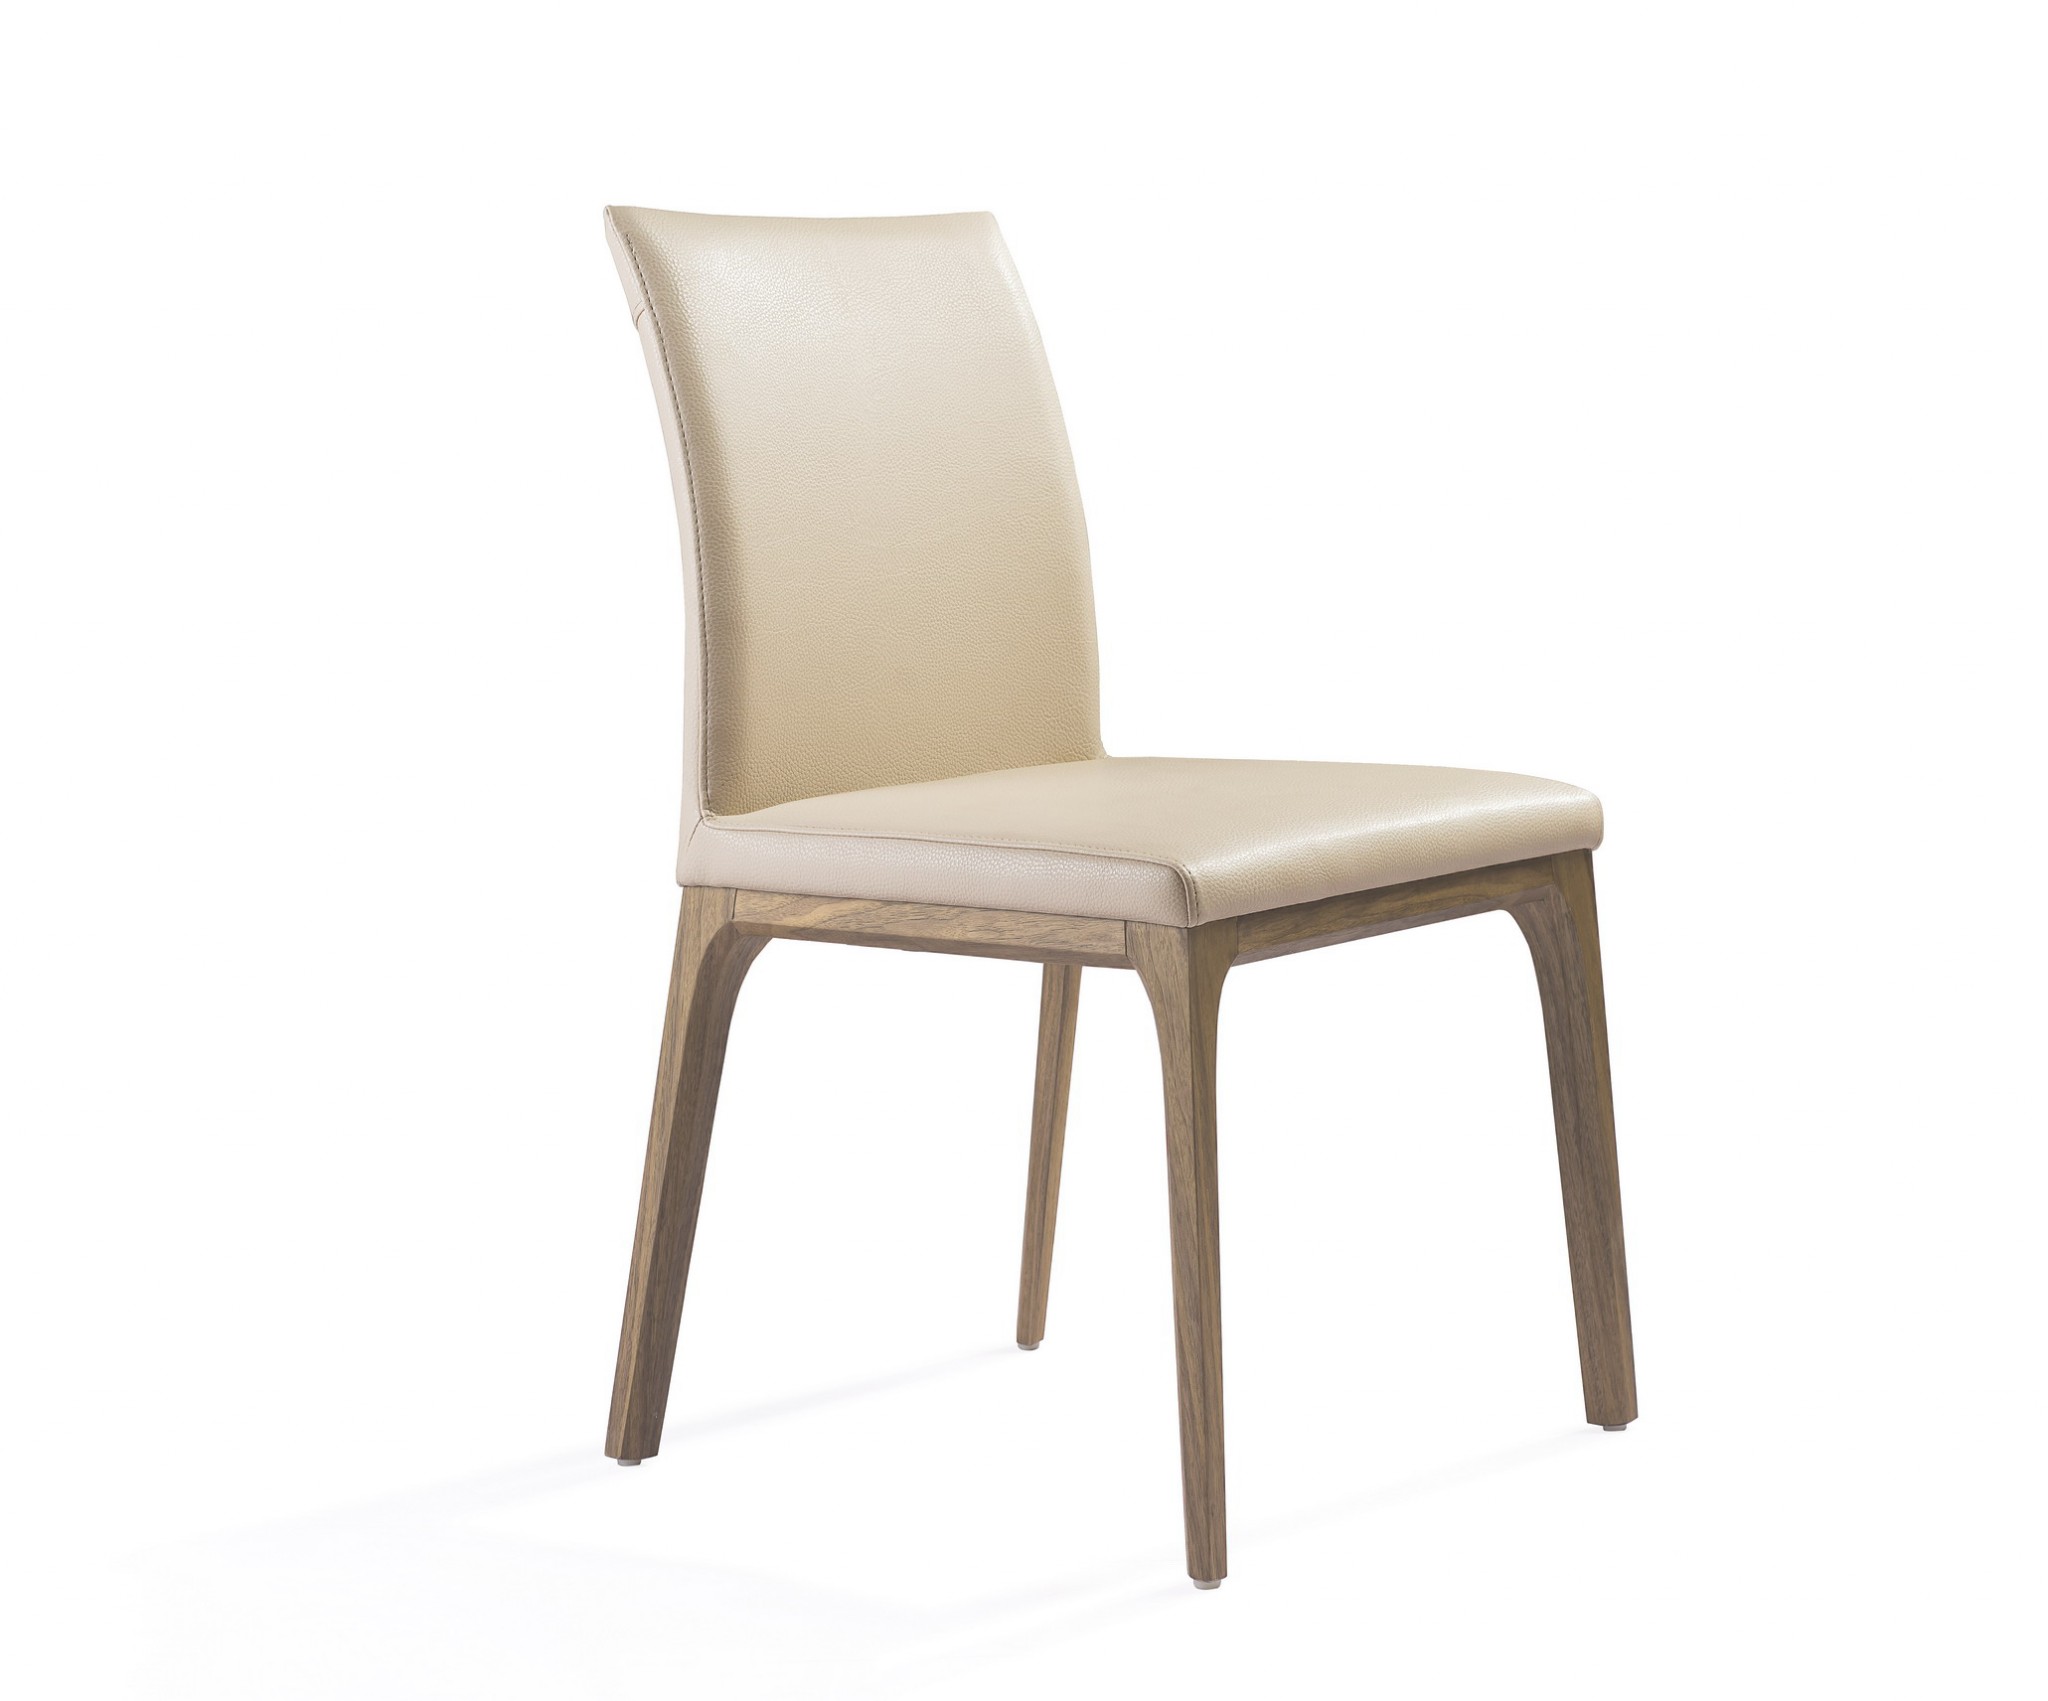 20" X 24" X 35" Taupe Faux Leather or Metal Dining Chair